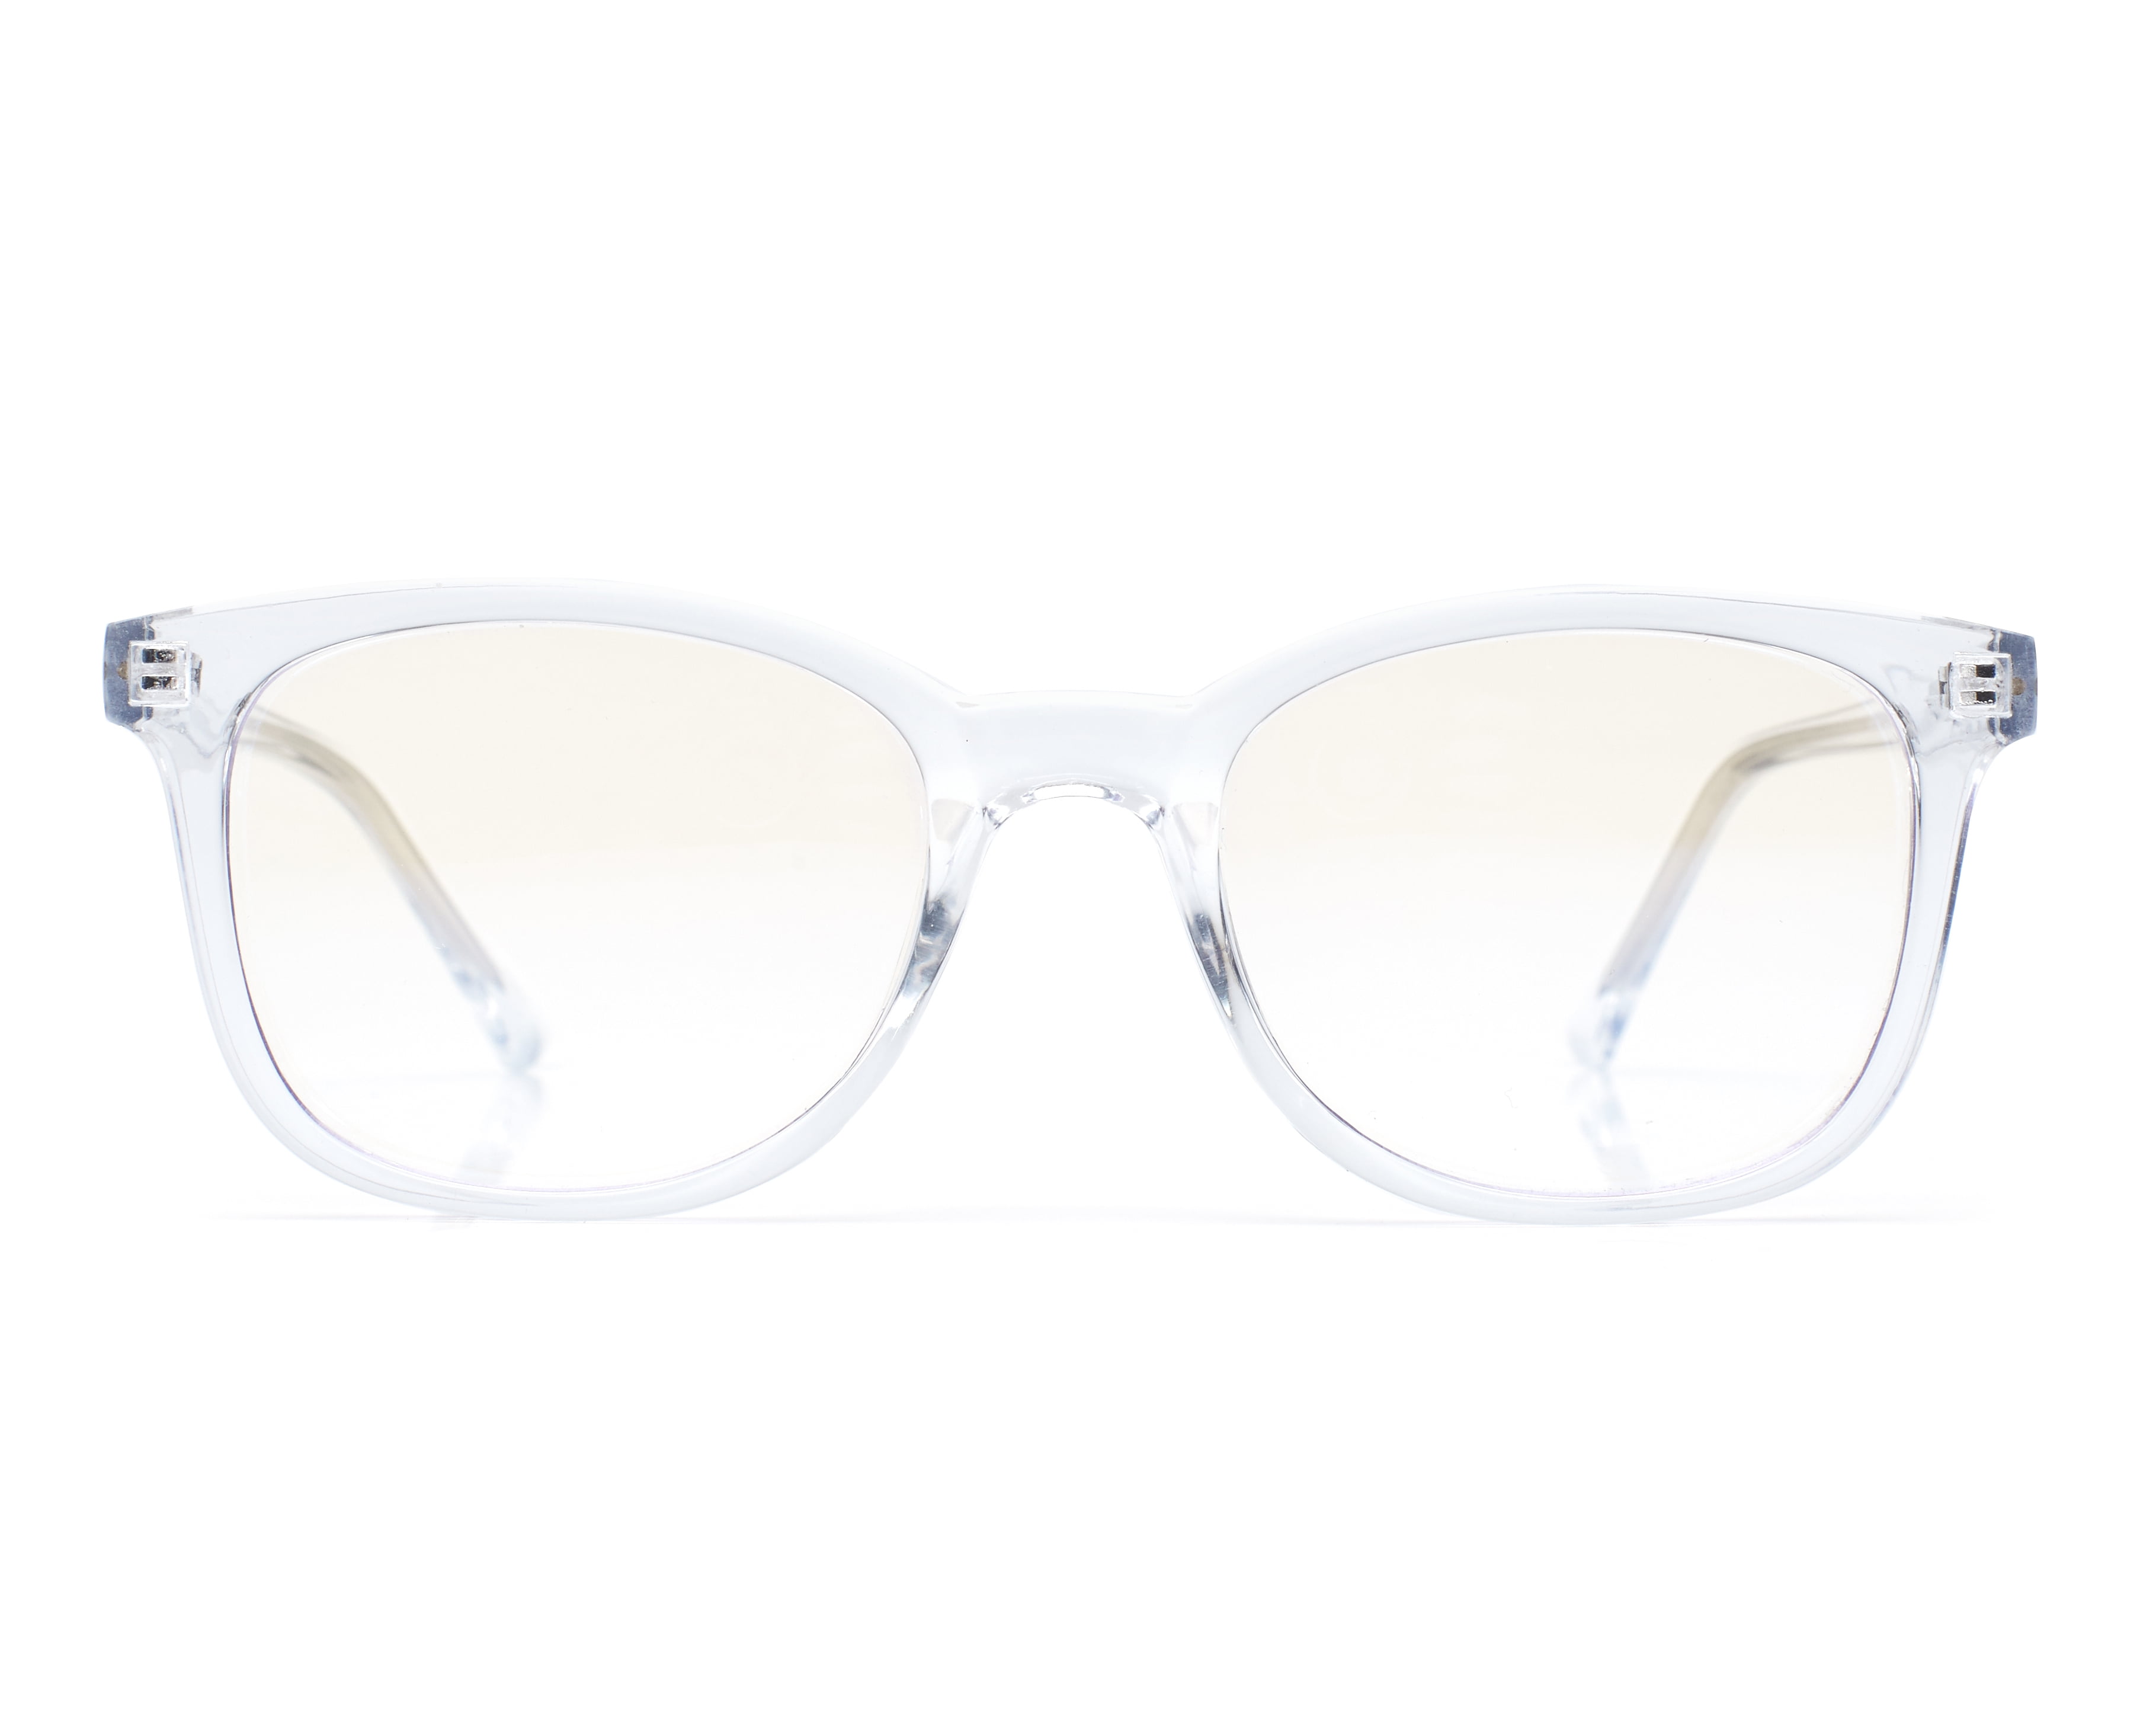 Wavebalance "Selby" Blue Light Reducing Computer and Device Glasses, Crystal, One Size